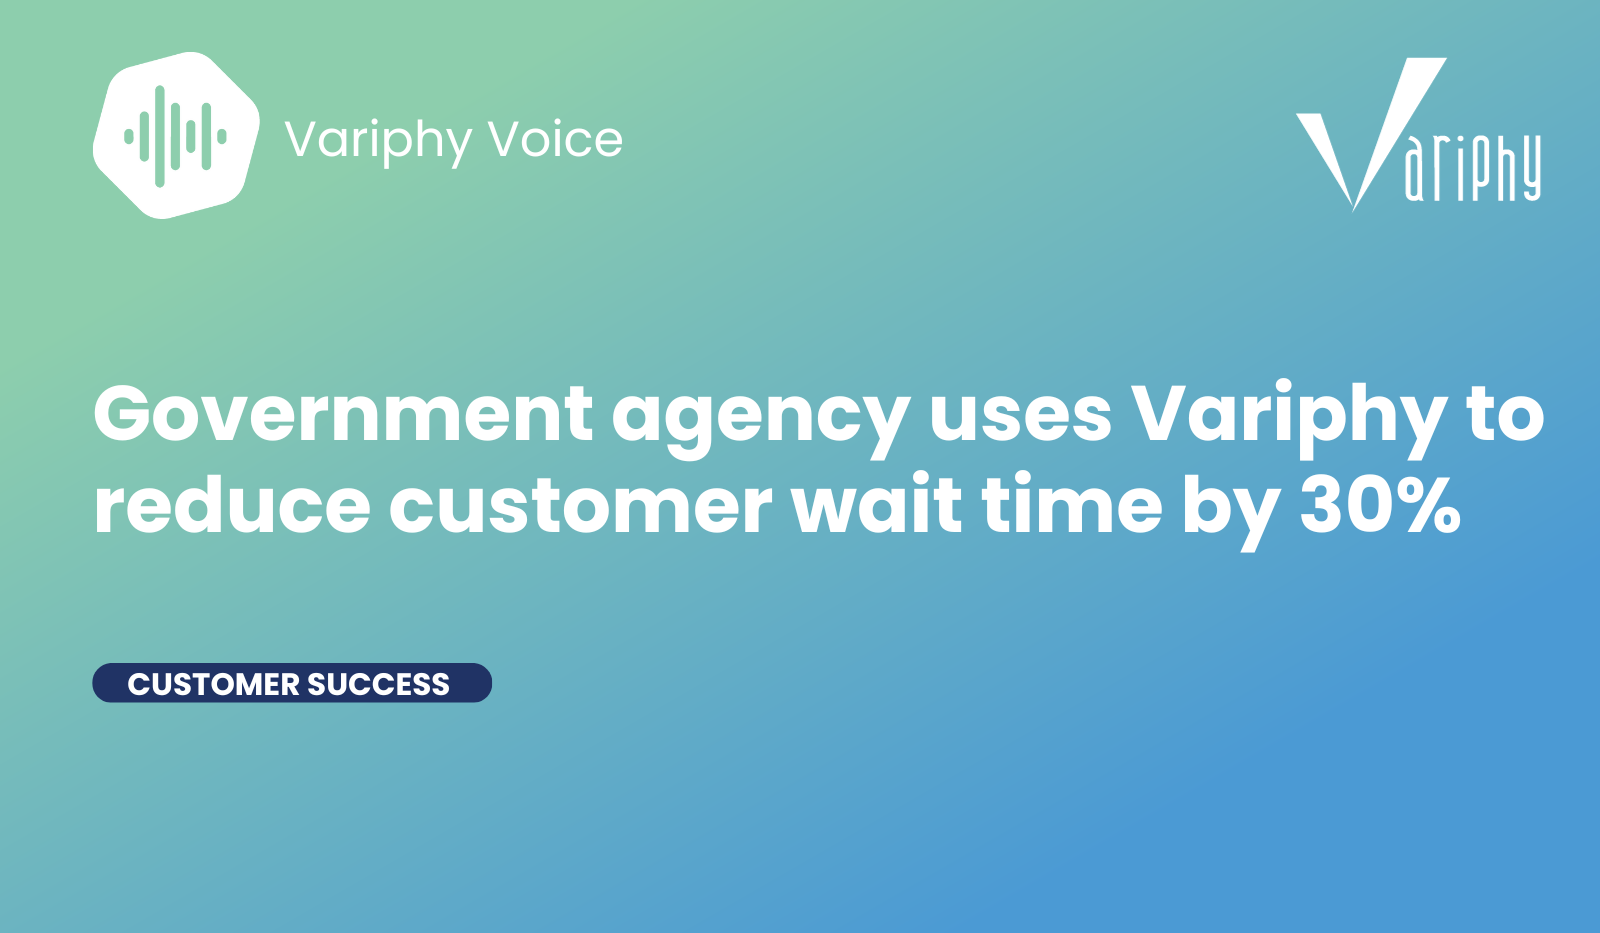 Government agency uses Variphy to reduce customer wait time by 30%